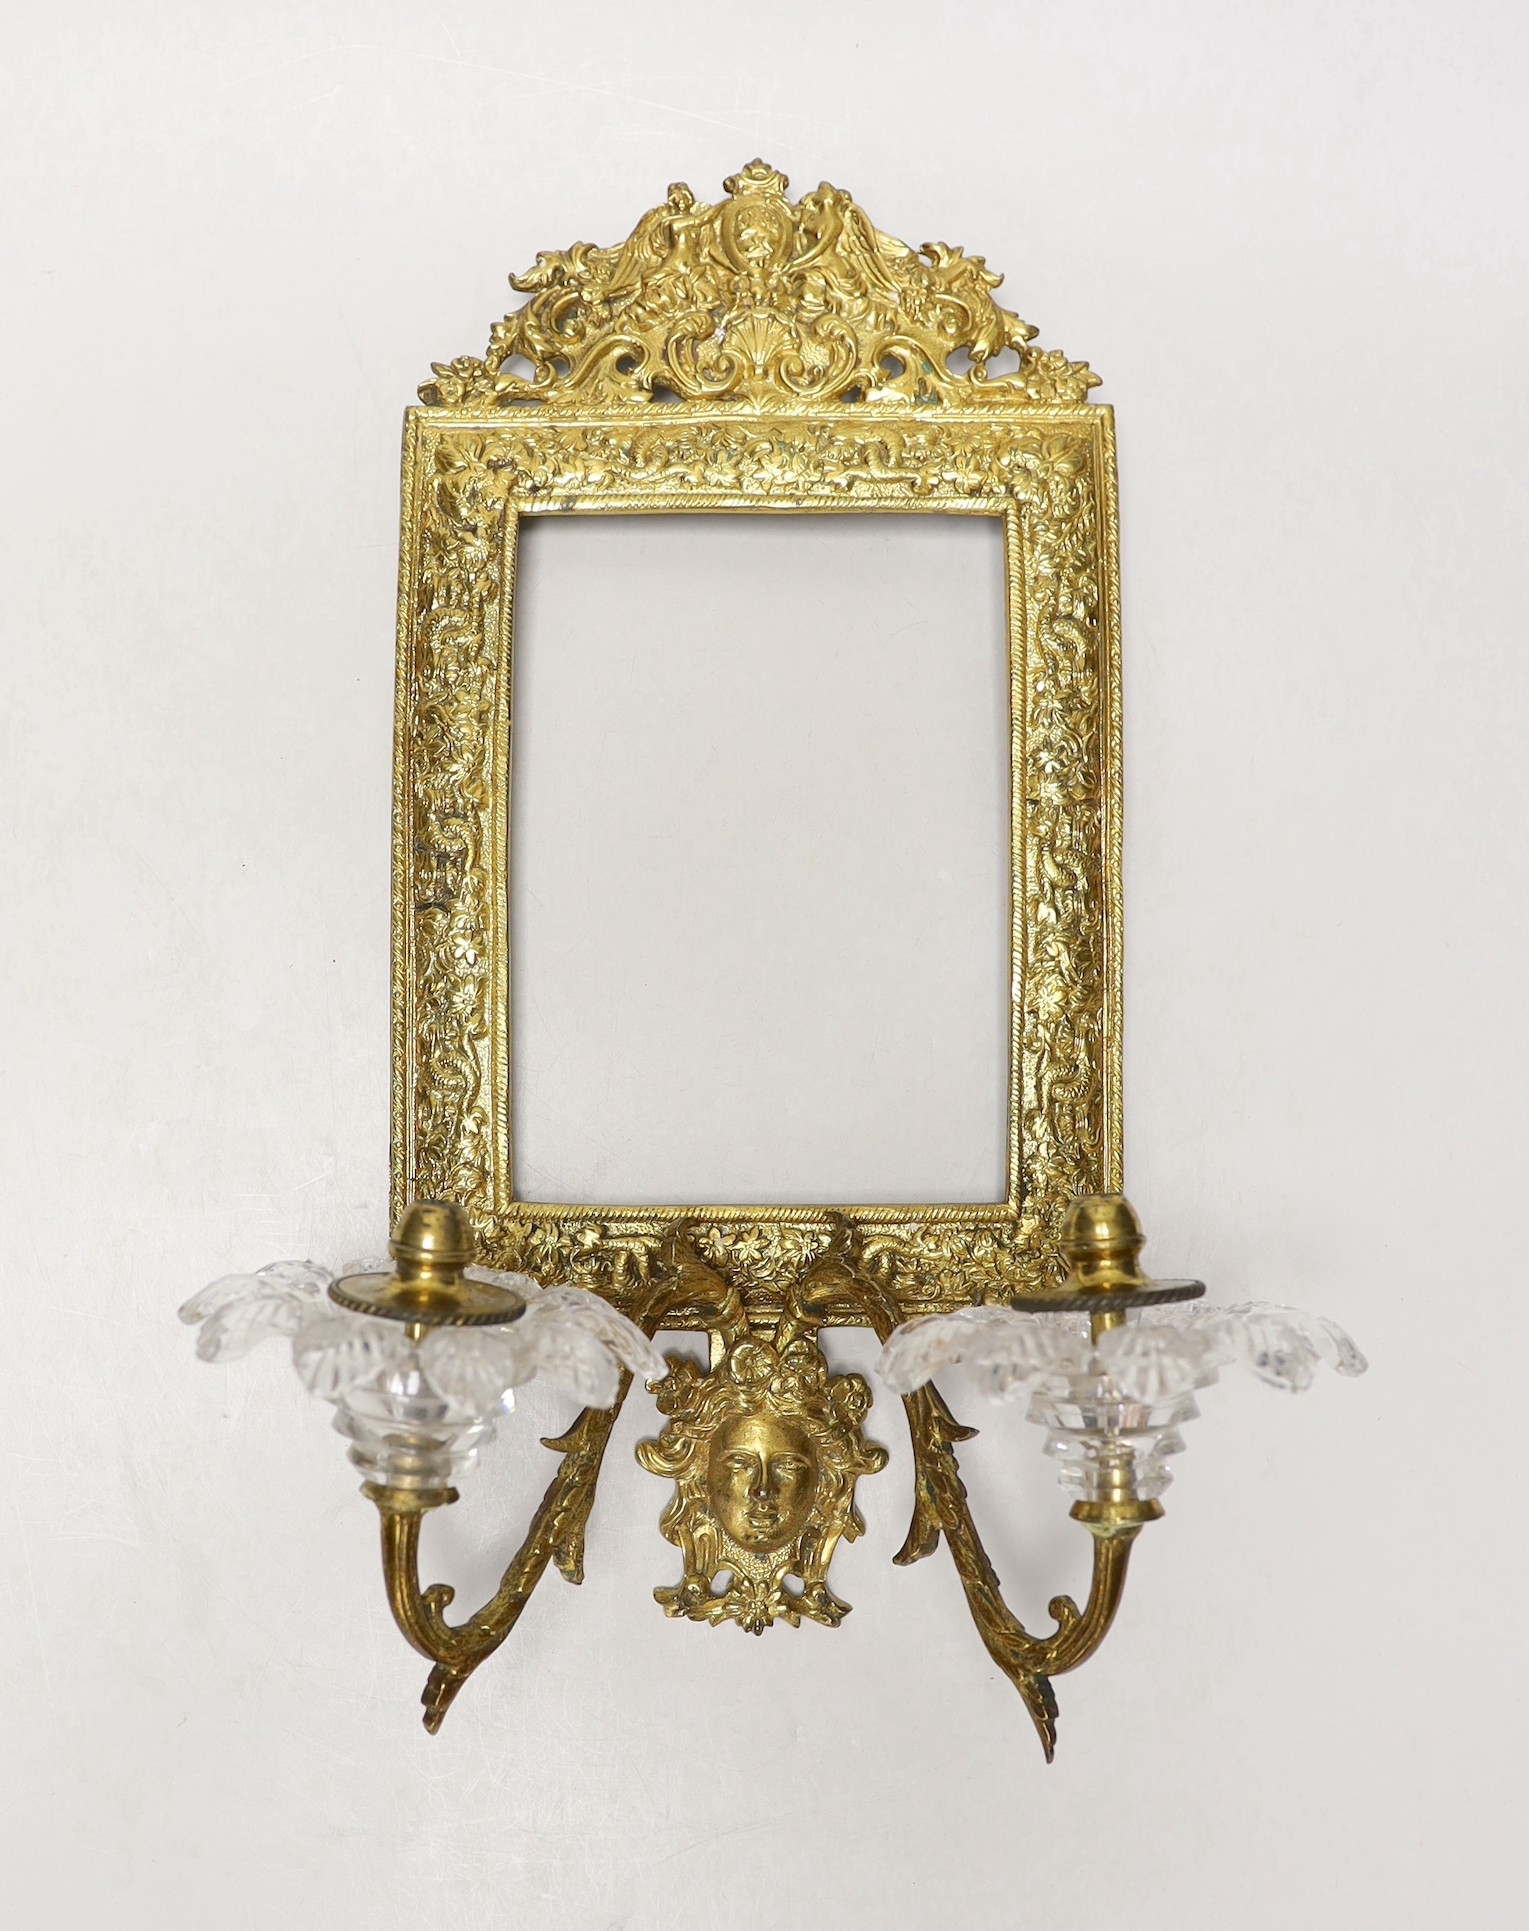 A decorative two branch ormolu wall mirror, lacking the mirror inset. 39cm tall overall, 16.5 x 11.5cm                                                                                                                      